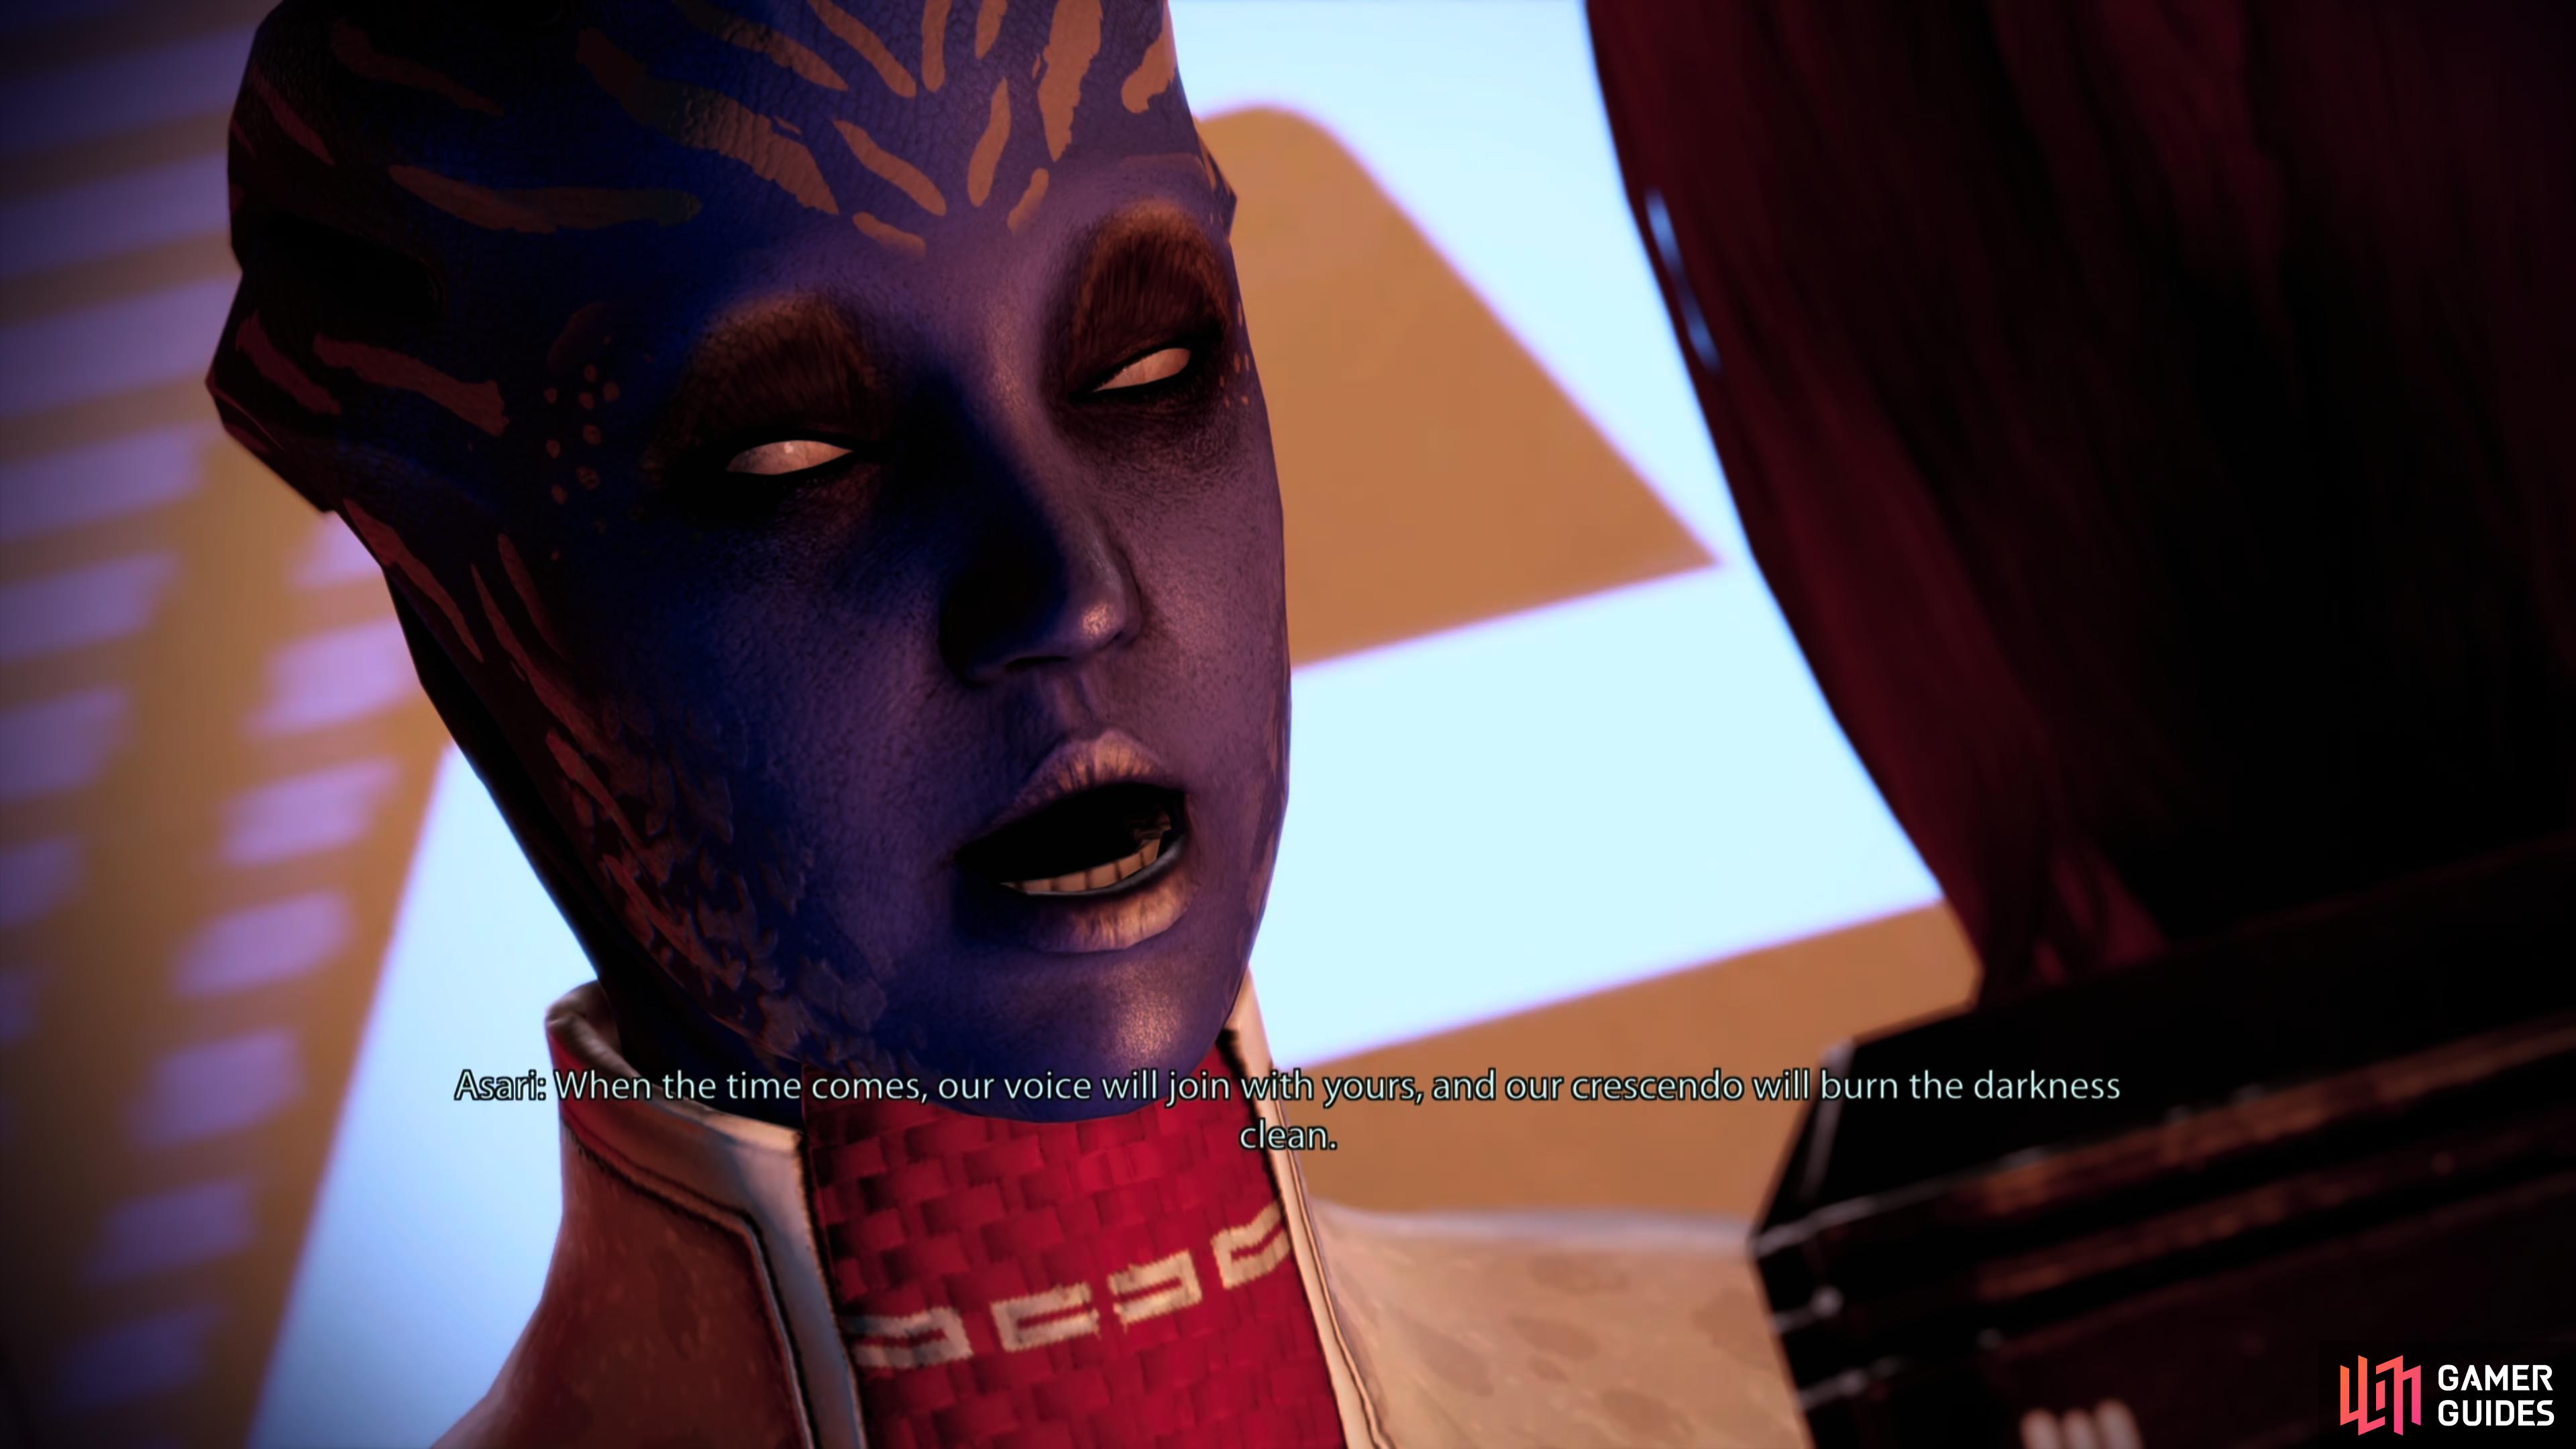 On the Trading Floor you might encounter a variety of Asari, including a mouthpiece of the Rachni Queen.